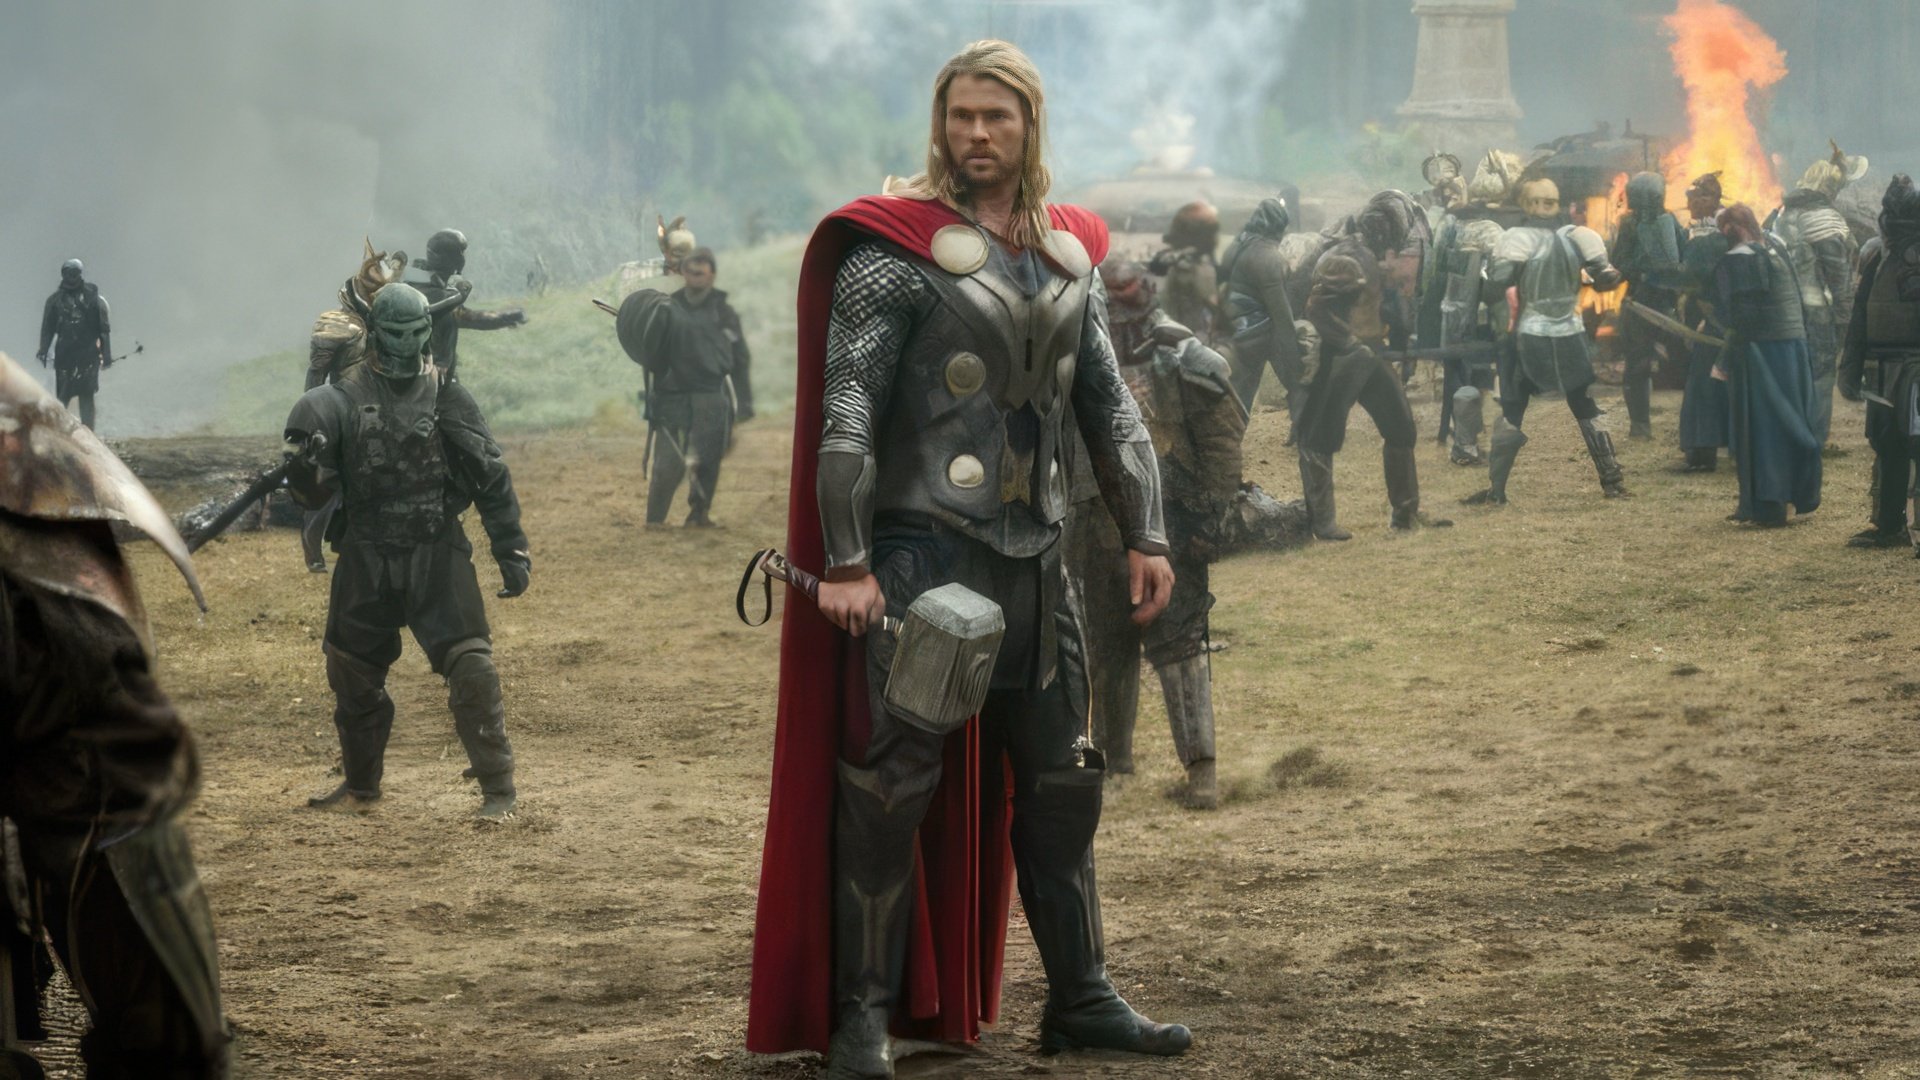 Chris Hemsworth gained popularity thanks to the role of Thor